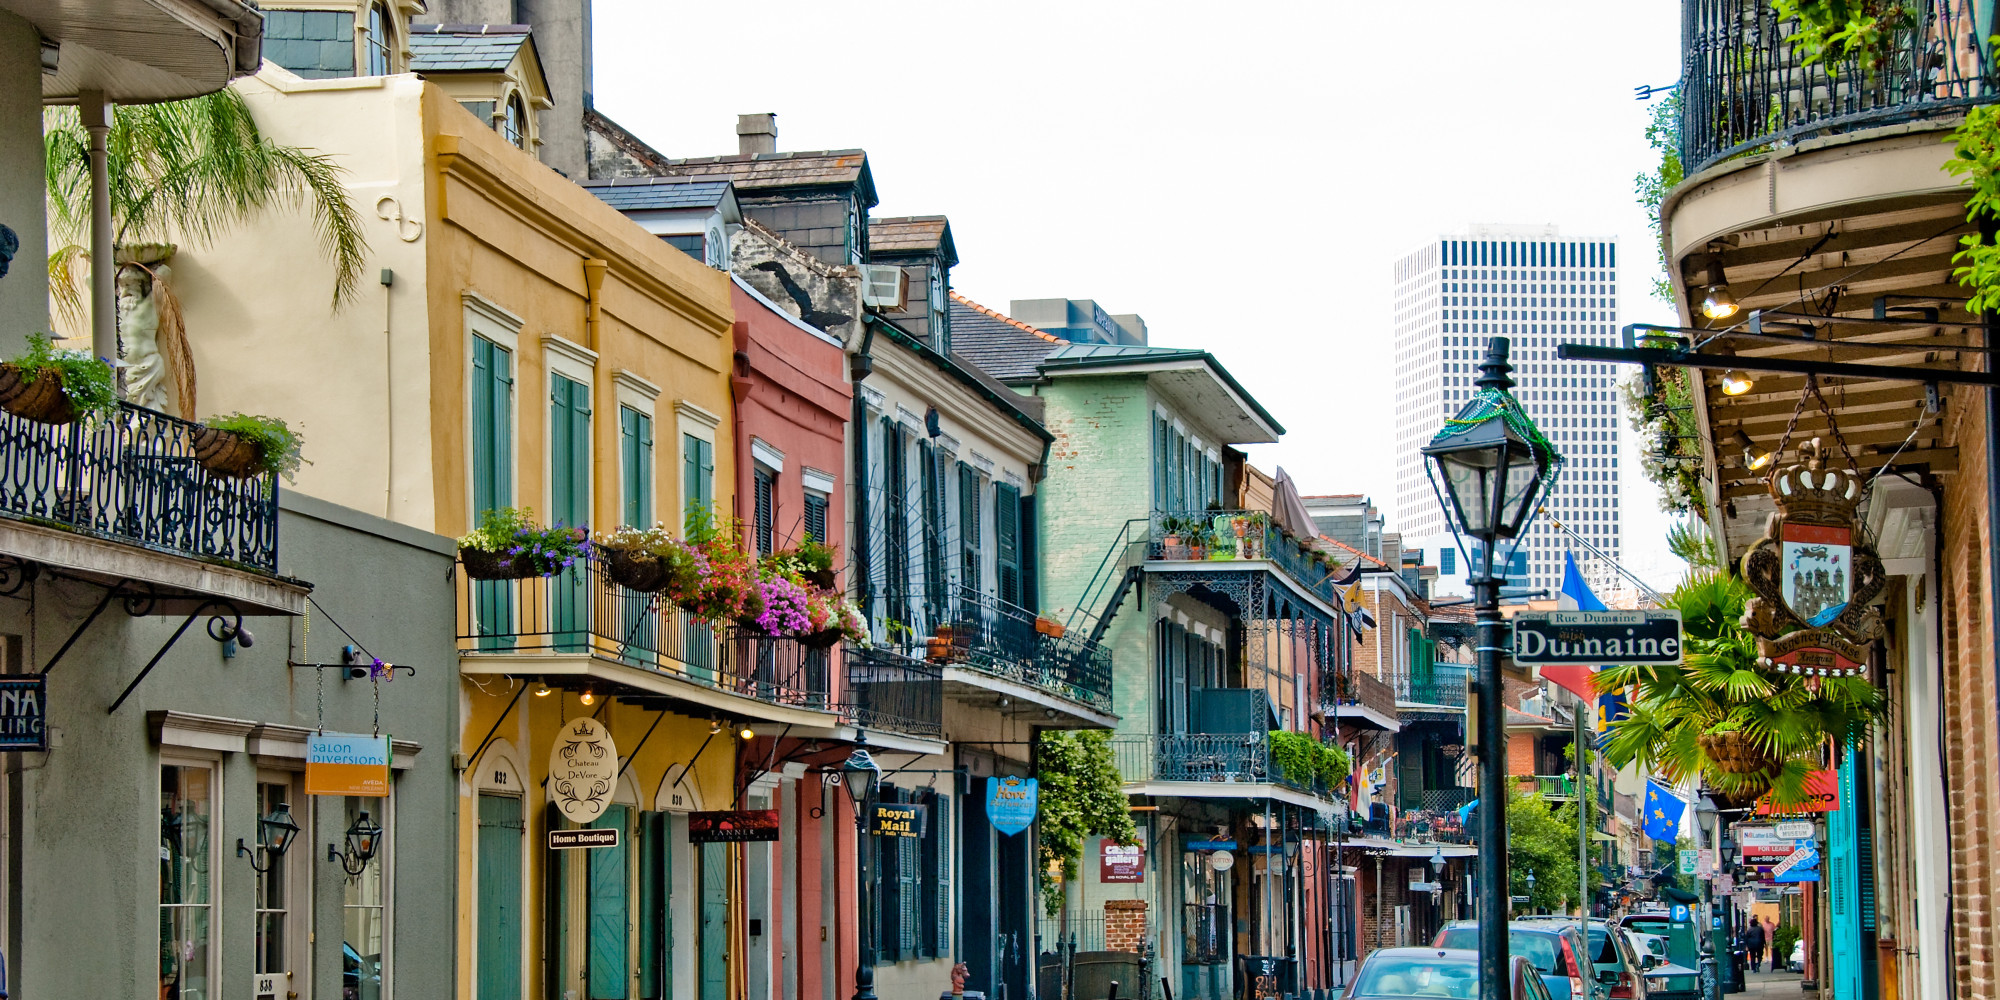 New Orleans; Old Town, History and Romance - Traveldigg.com